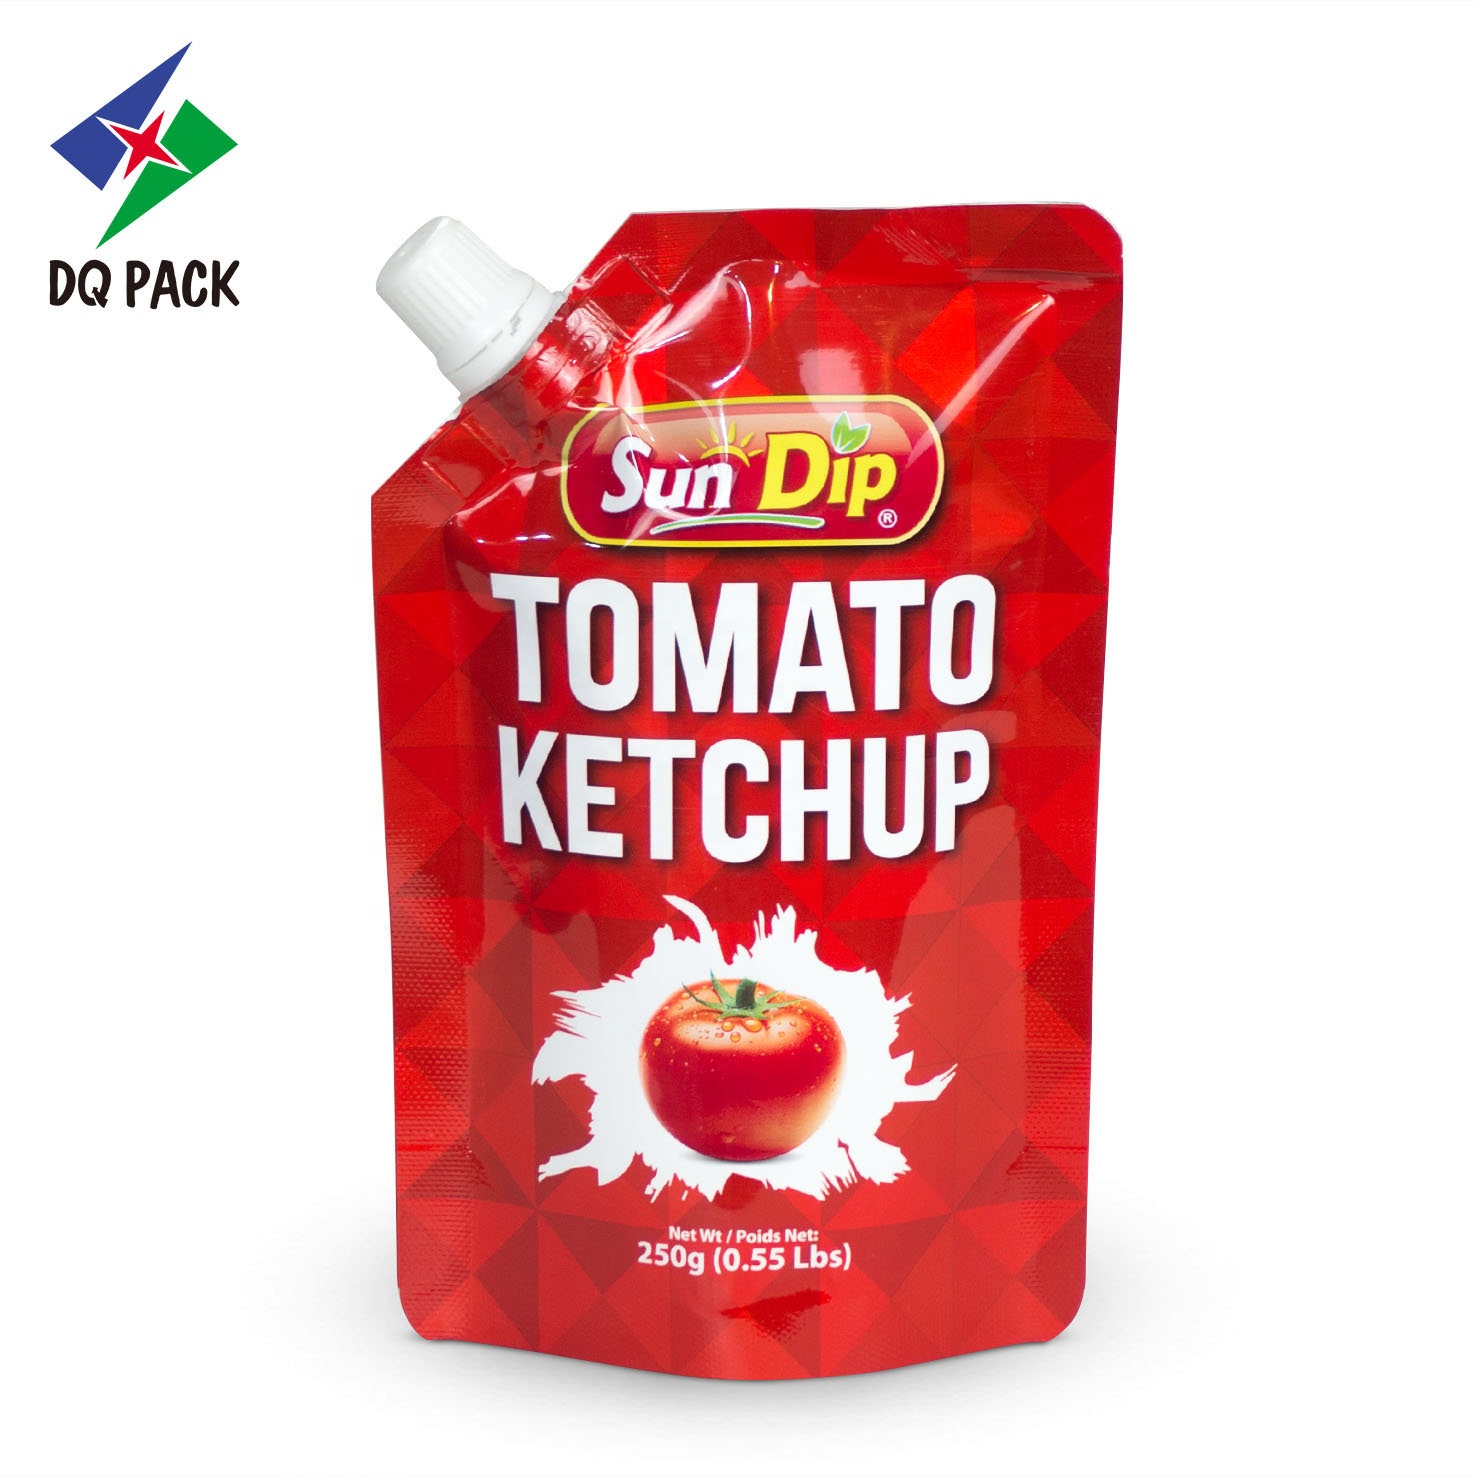 DQ PACK Hot Flexible packaging doypack spout pouch for sauces ketchup packaging bag